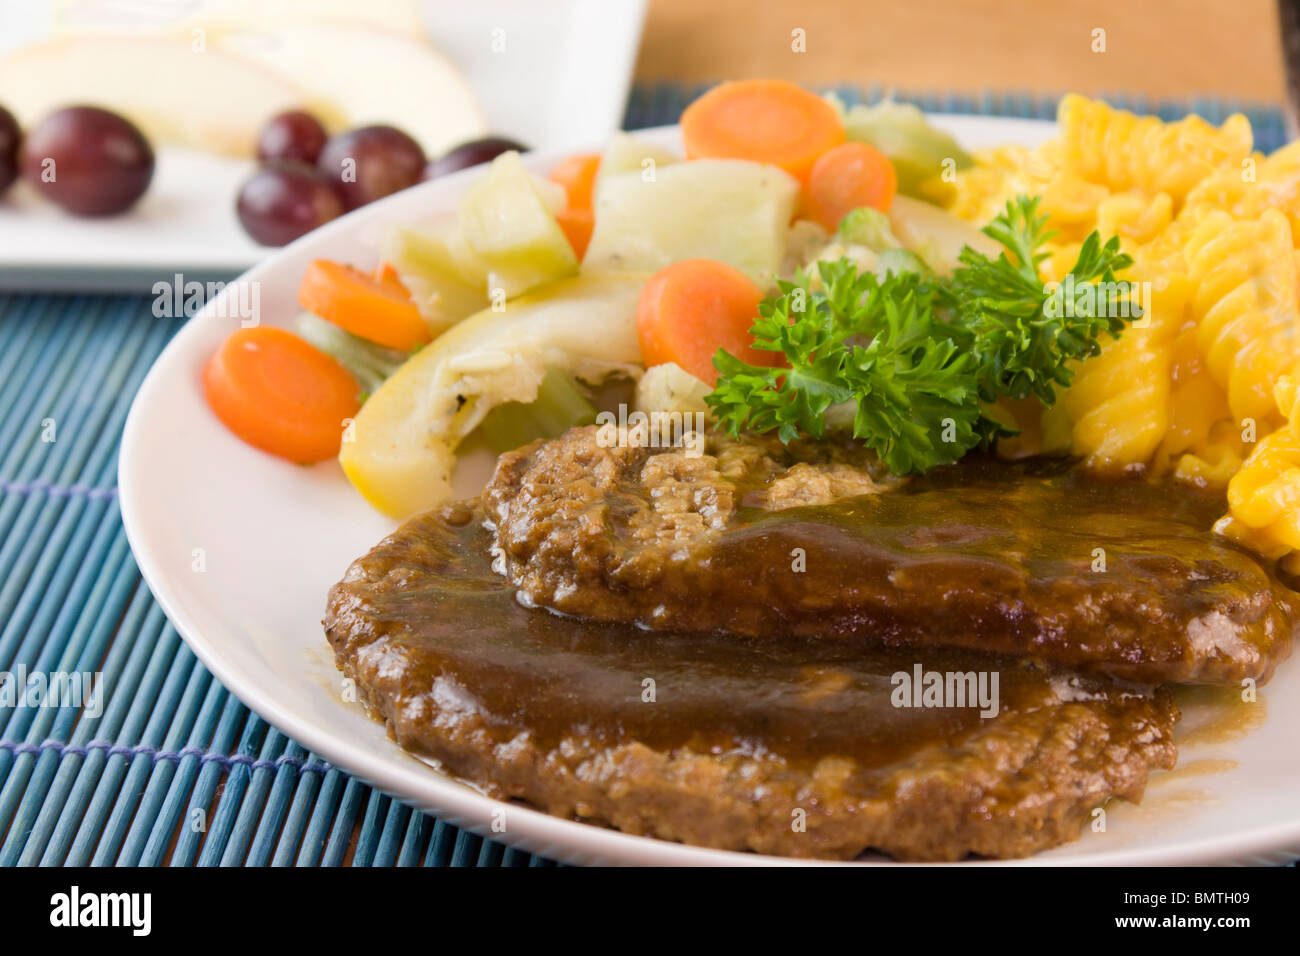 detail of salisbury steak patties with steam vegetables and spiral macaroni Stock Photo